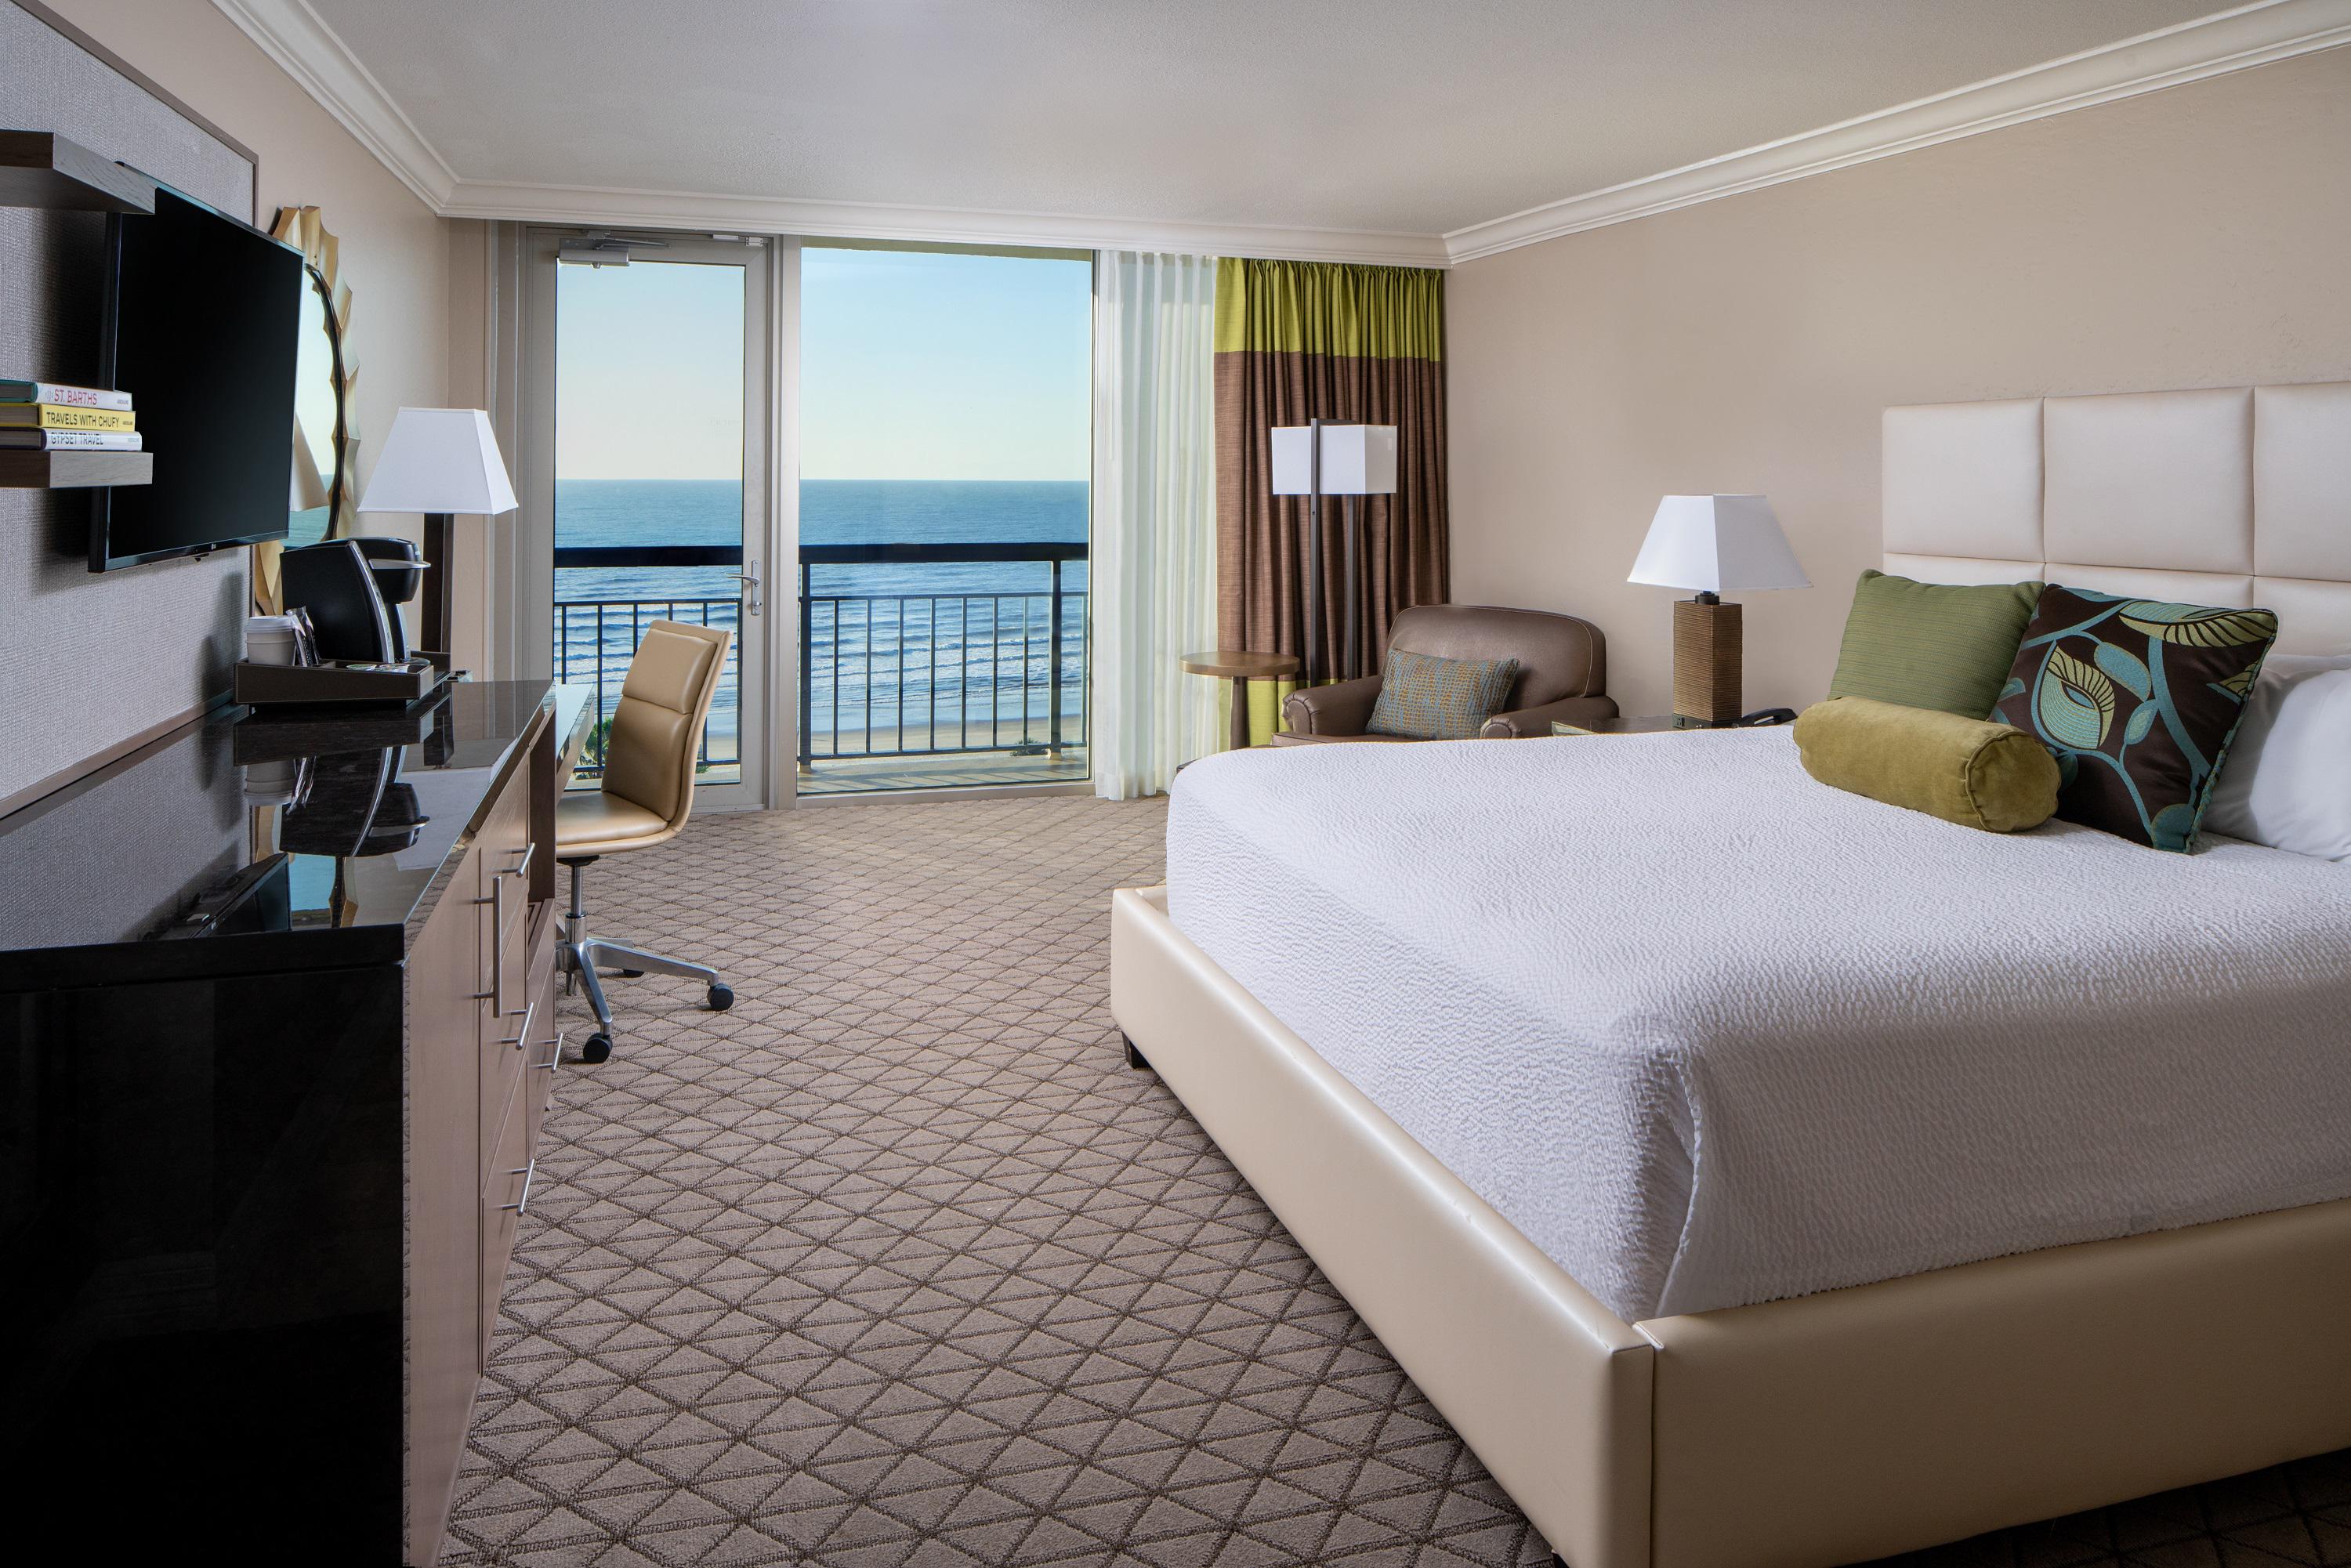 Ocean View Room The San Luis Resort, Spa and Conference Center Galveston (409)744-1500